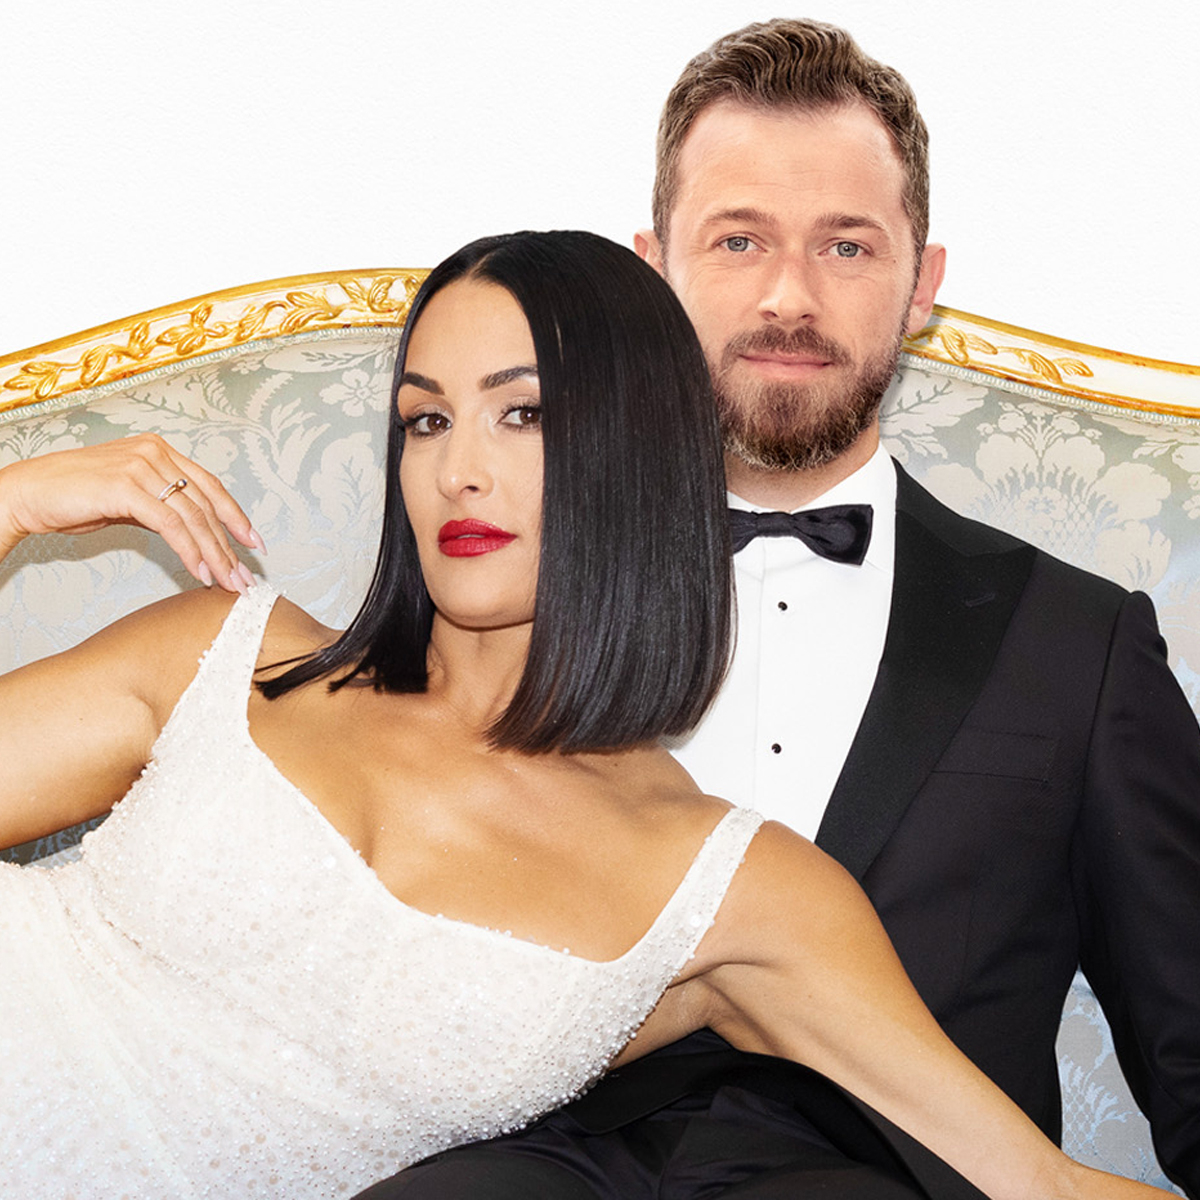 How Nikki Bella and Artem Chigvintsev’s Wedding Venue Is Connected to Their Love Story – E! Online